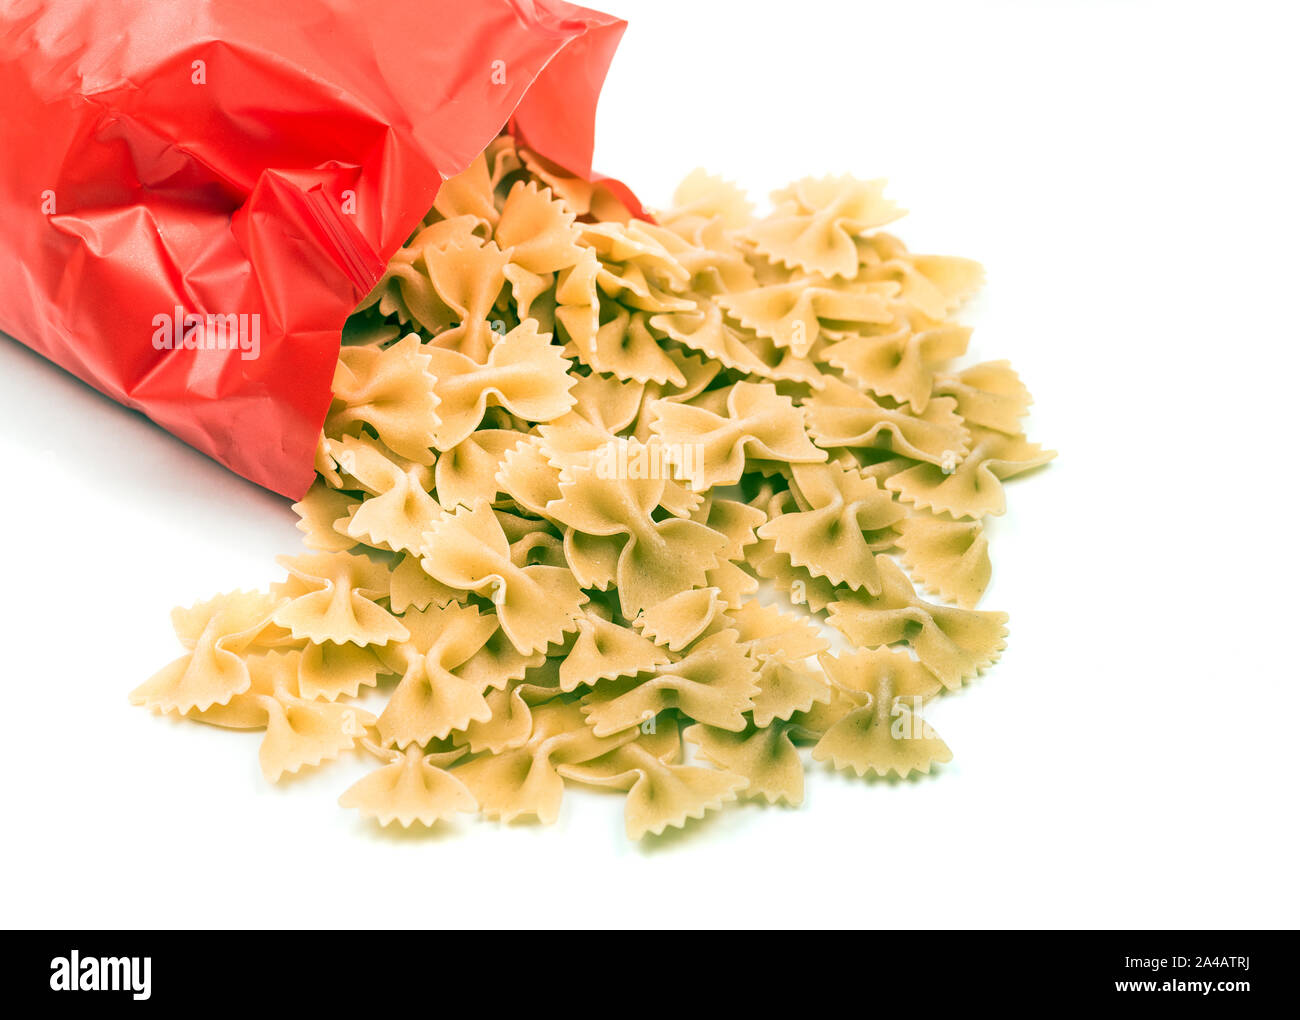 Farfalle pasta dropped from package on white background Stock Photo